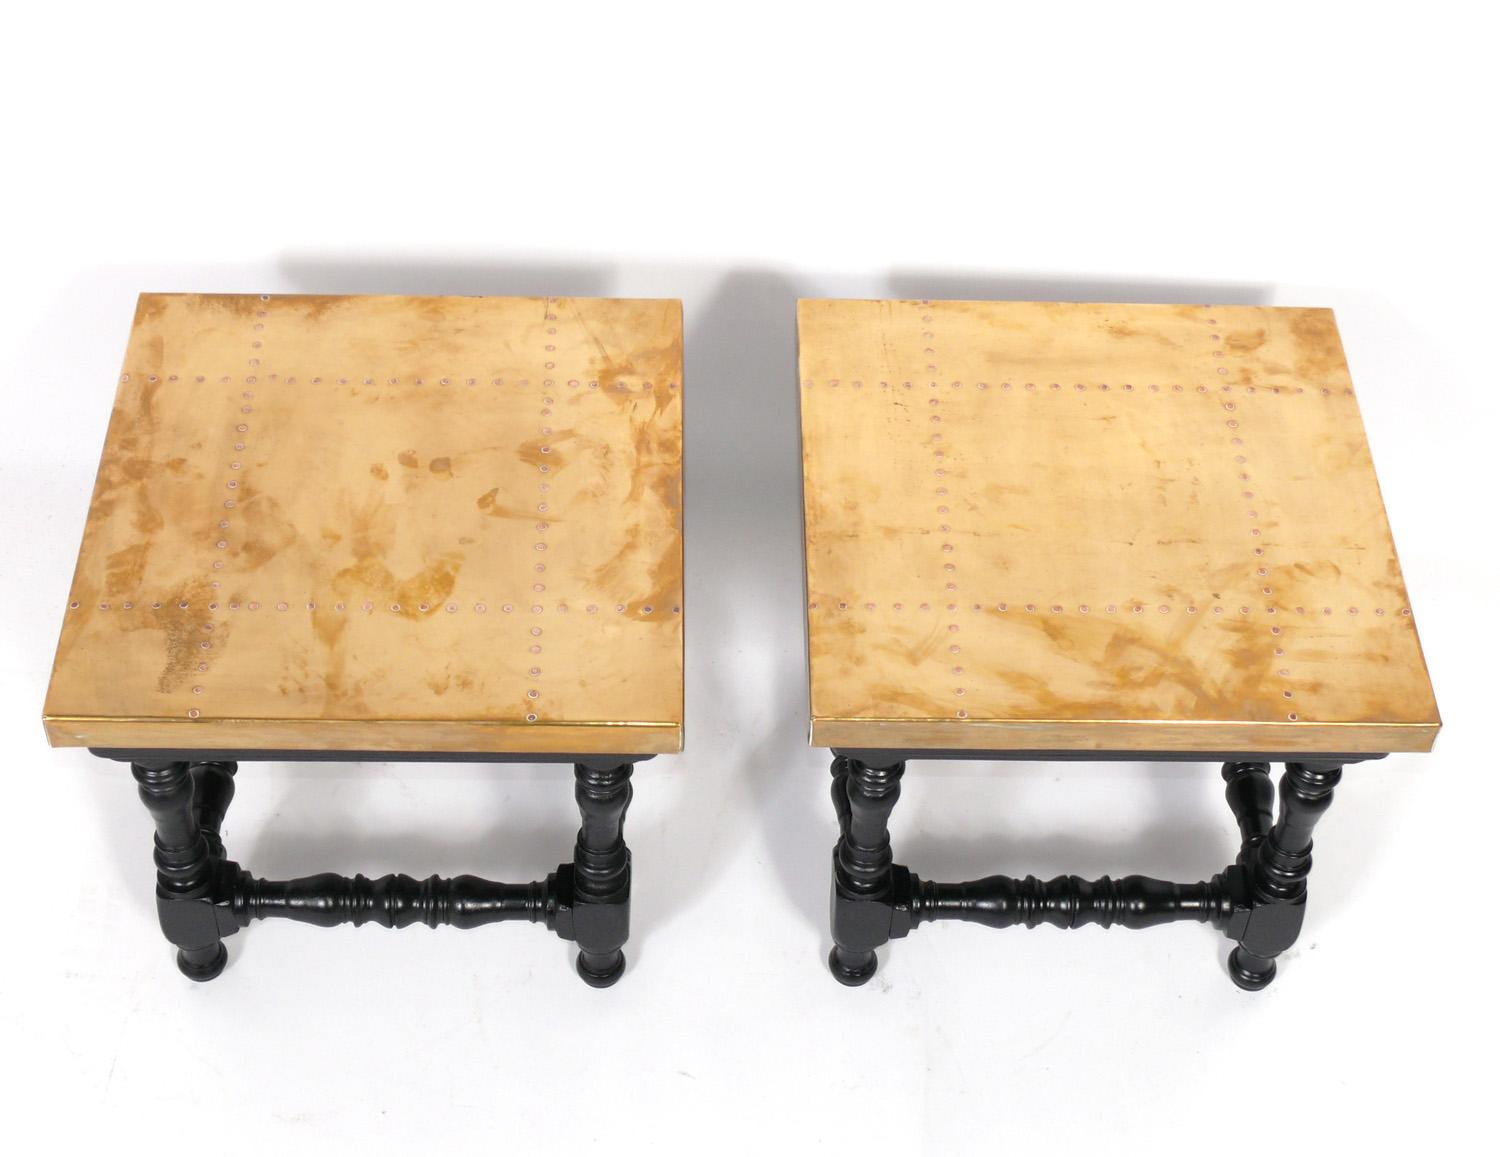 Brass and black finished wood tables, probably by Sarreid, circa 1960s. They are a versatile size and can be used as side or end tables, or as night stands.